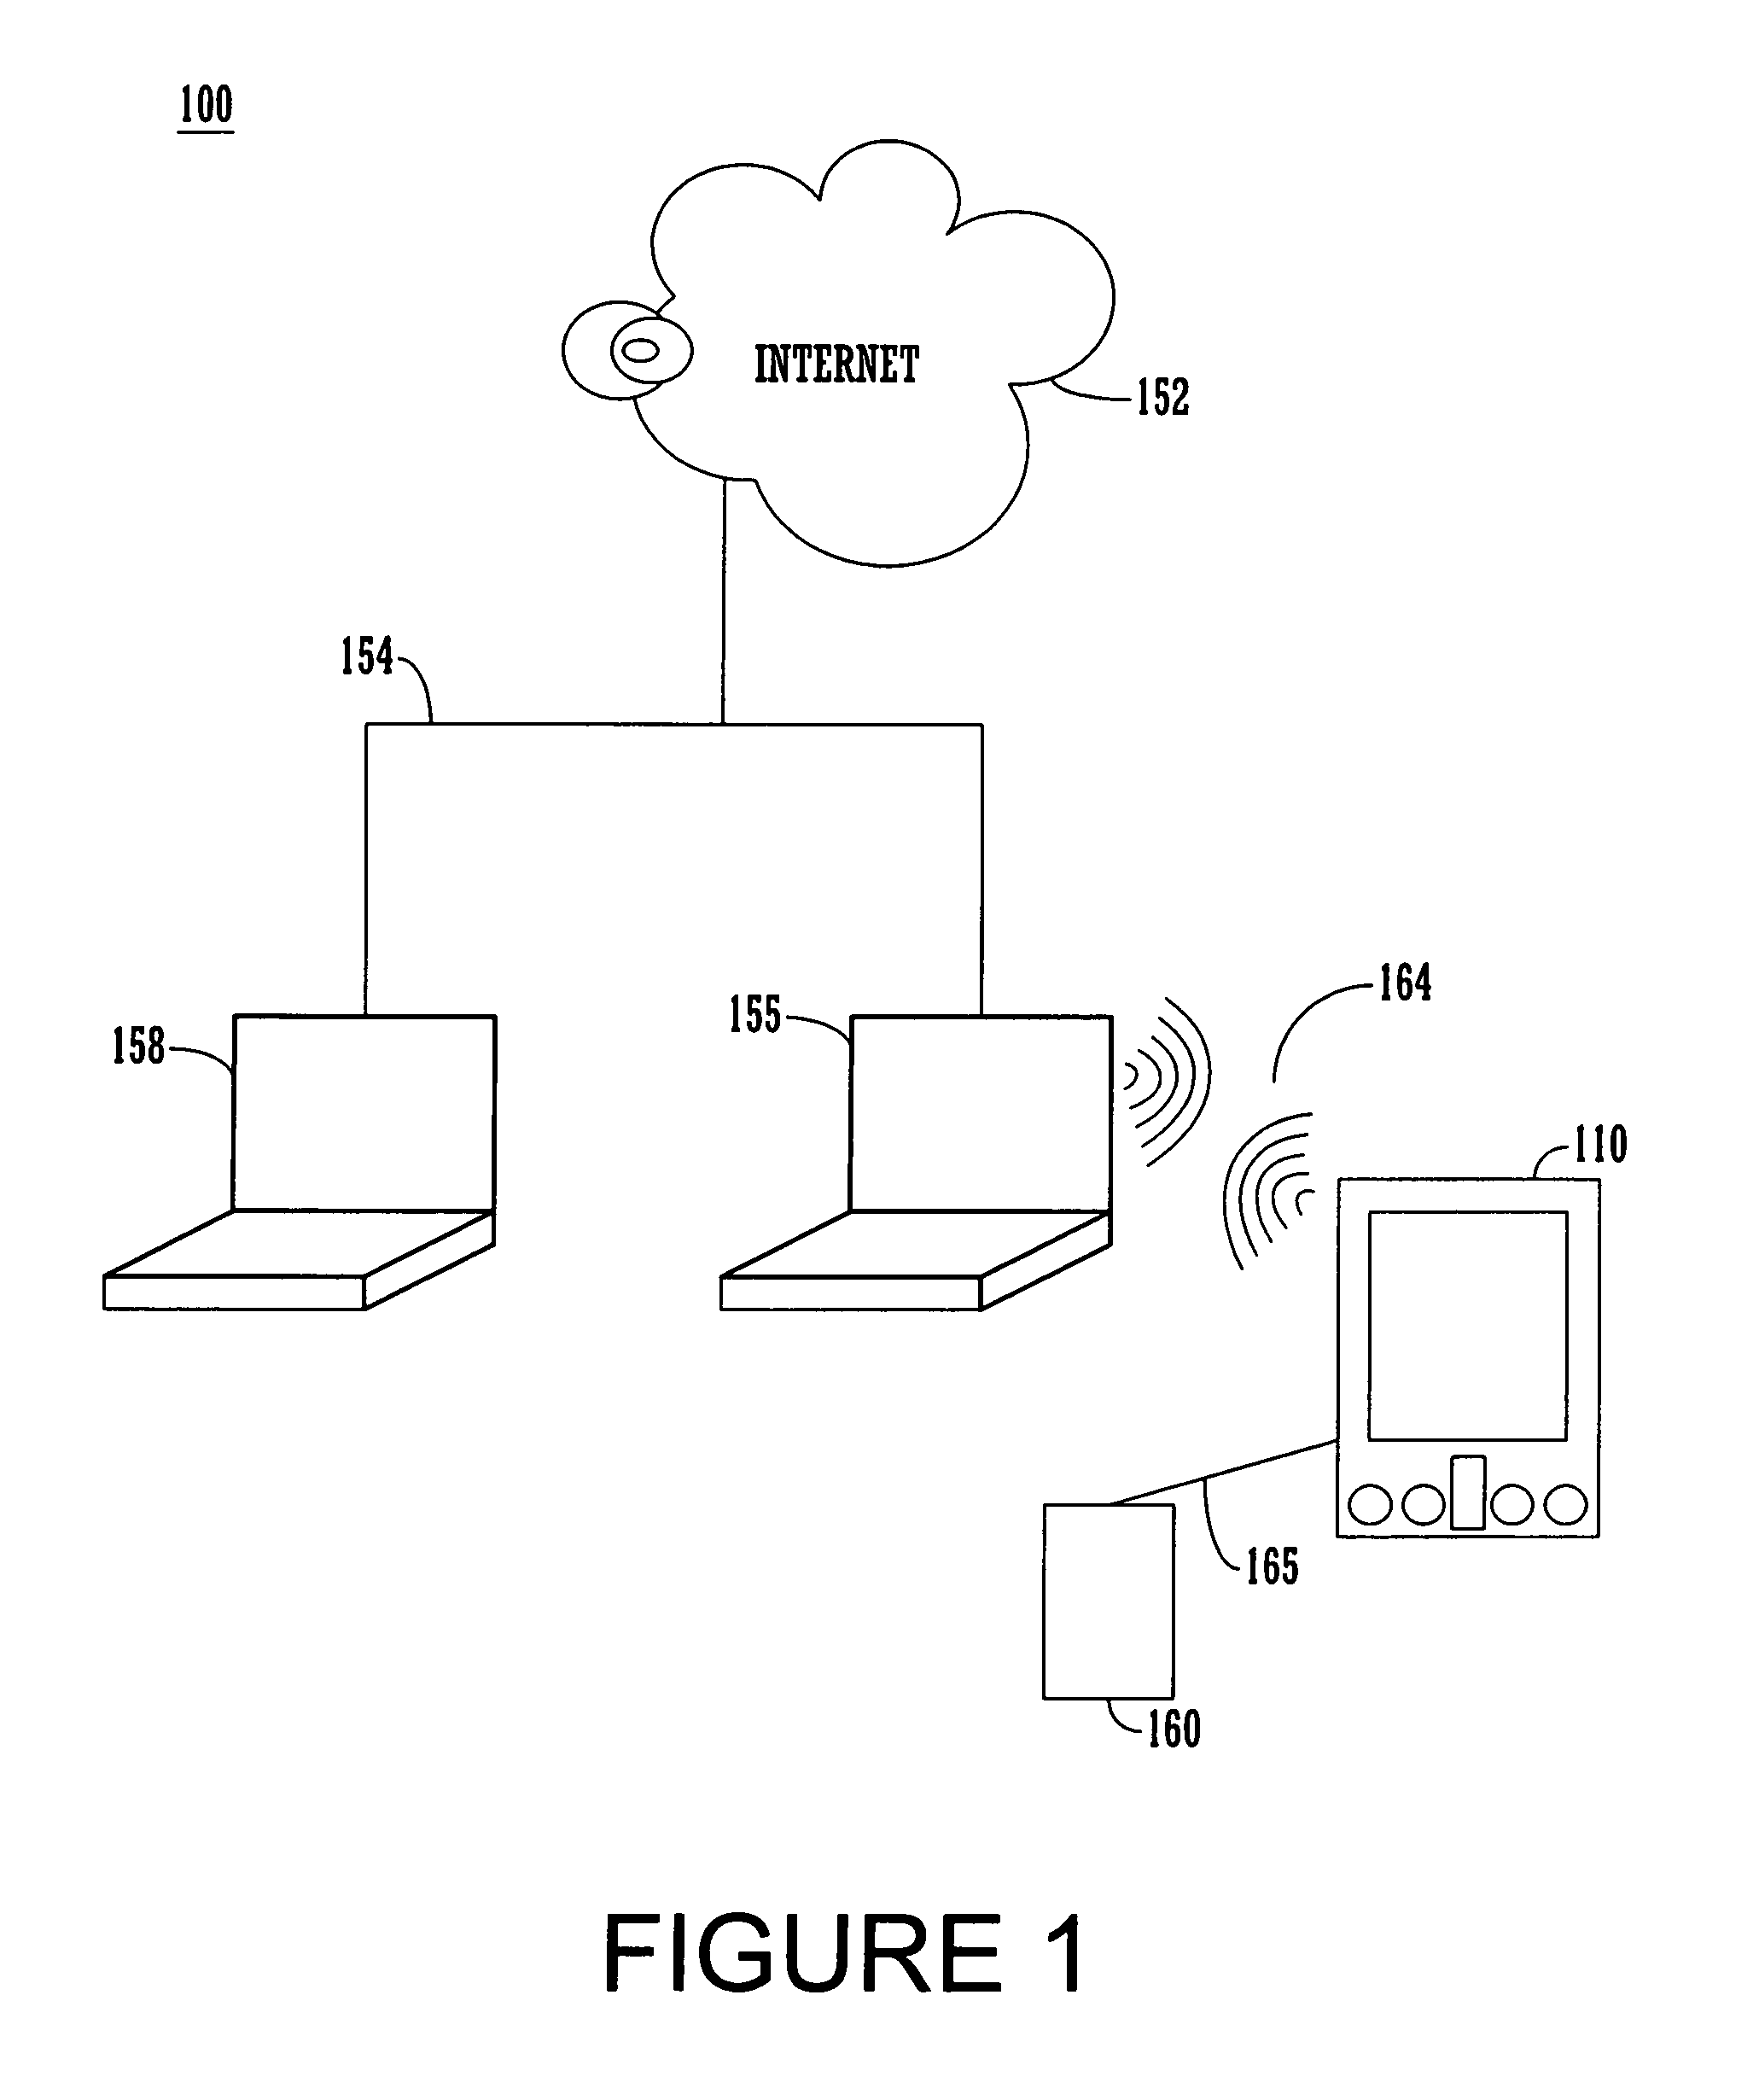 Method and apparatus for synchronizing and recharging a connector-less portable computer system